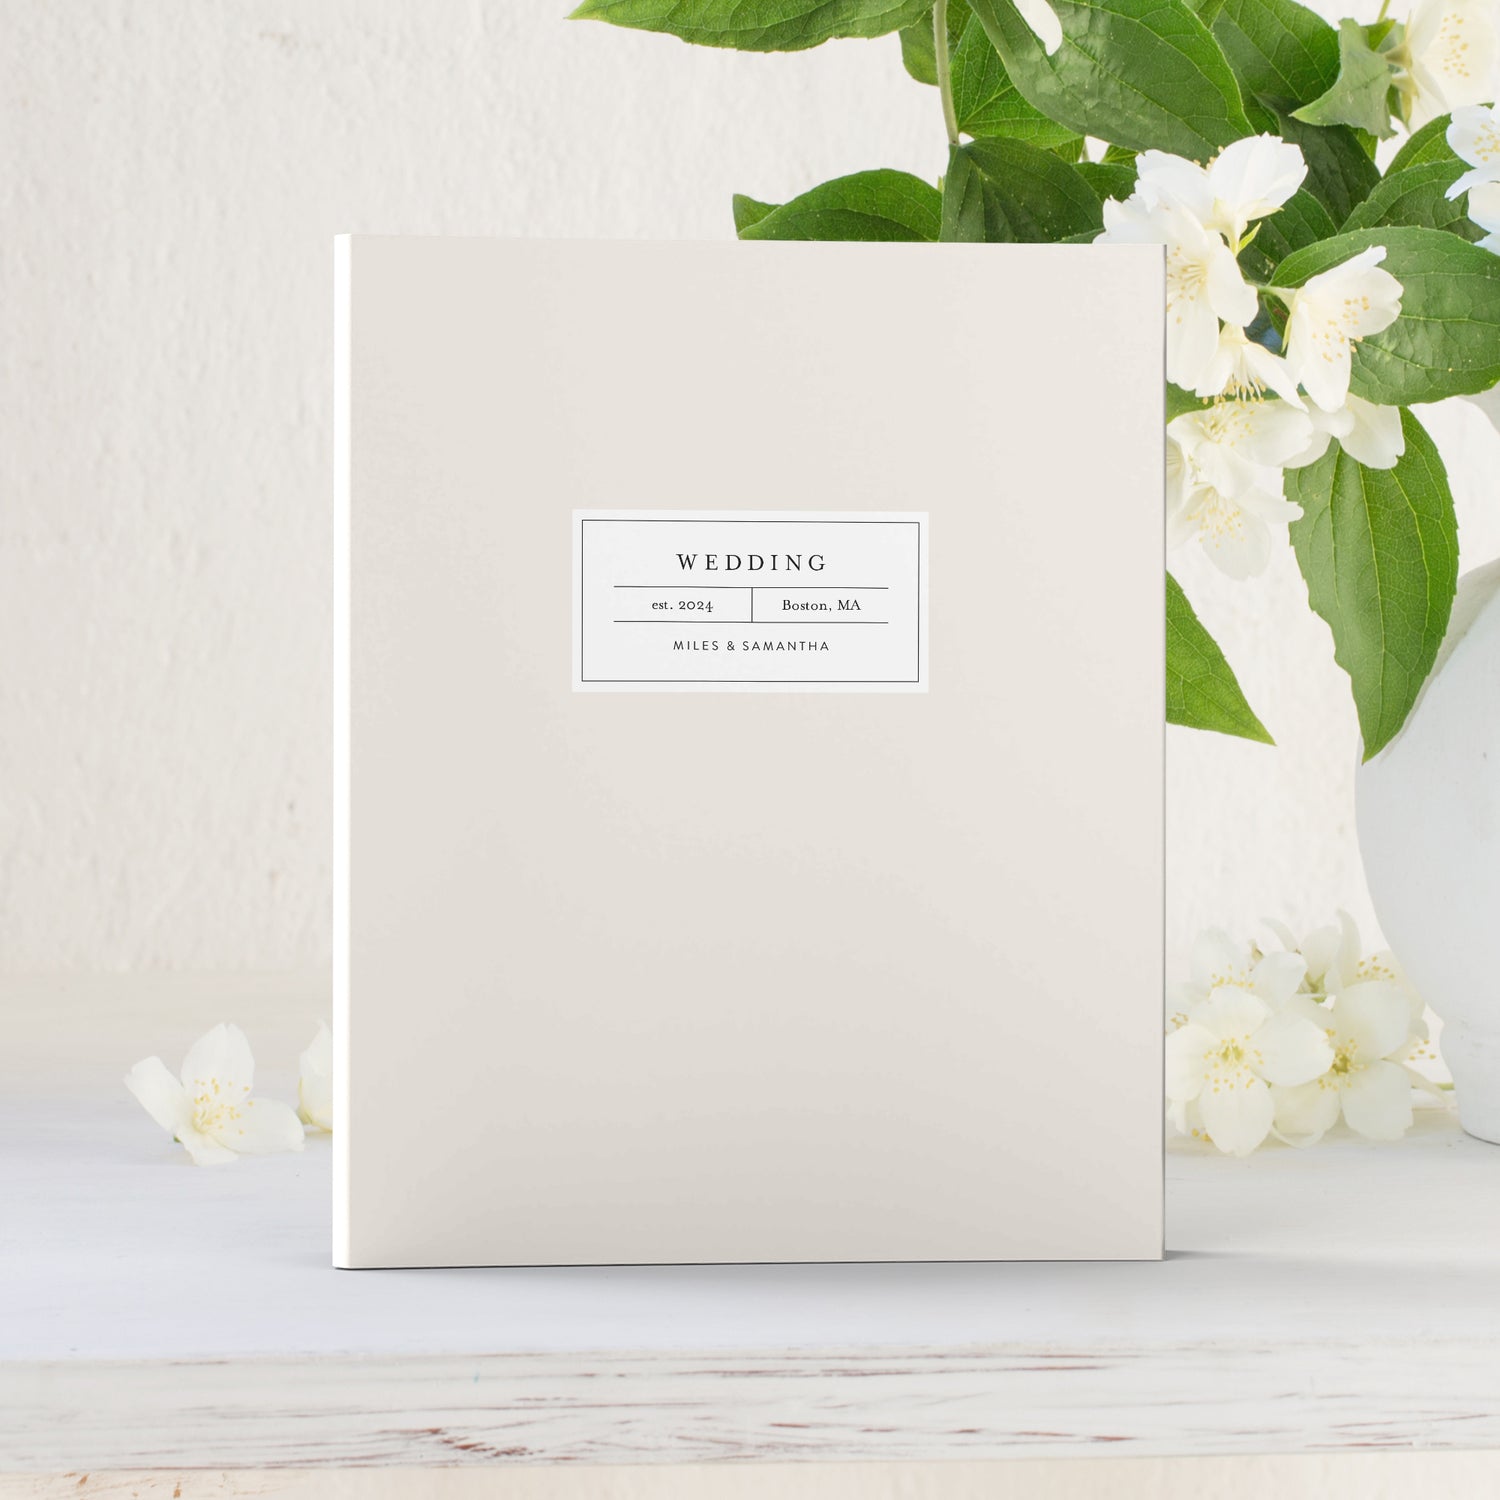 Wedding Planning Binders by Wicked Bride are beautiful, durable and flexible - allowing you to keep copies of your vendor contracts and includes a printable wedding planner PDF.